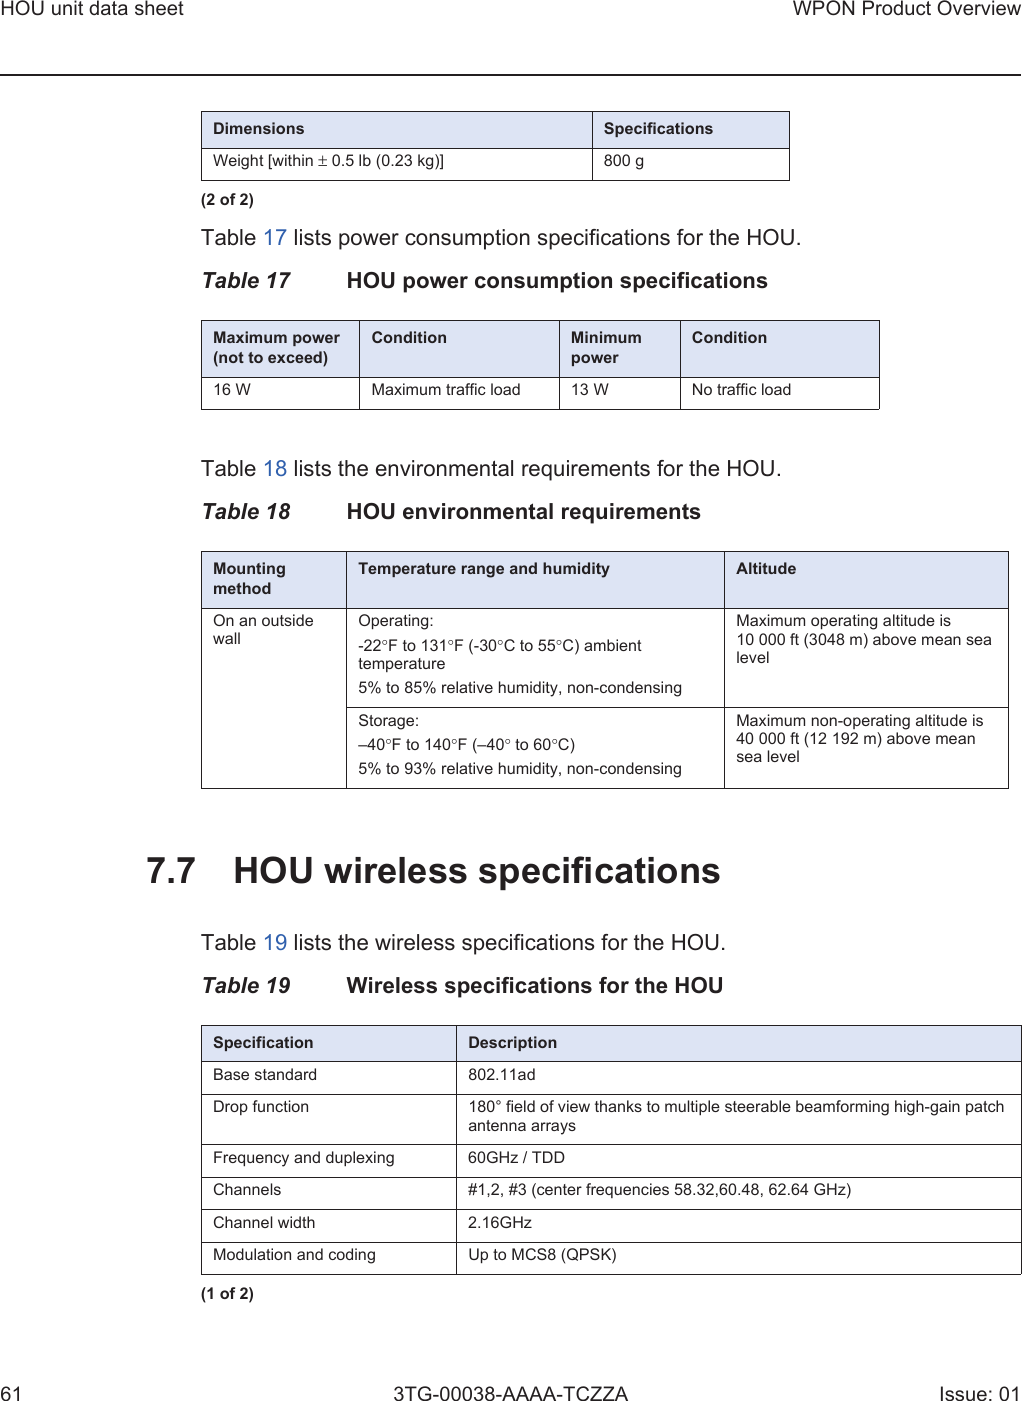 HOU unit data sheet61WPON Product Overview3TG-00038-AAAA-TCZZA Issue: 01Table 17 lists power consumption specifications for the HOU.Table 17 HOU power consumption specificationsTable 18 lists the environmental requirements for the HOU.Table 18 HOU environmental requirements7.7 HOU wireless specificationsTable 19 lists the wireless specifications for the HOU.Table 19 Wireless specifications for the HOUWeight [within ± 0.5 lb (0.23 kg)] 800 gMaximum power (not to exceed)Condition Minimum powerCondition16 W Maximum traffic load 13 W No traffic loadMounting methodTemperature range and humidity AltitudeOn an outside wallOperating:-22°F to 131°F (-30°C to 55°C) ambient temperature5% to 85% relative humidity, non-condensingMaximum operating altitude is 10 000 ft (3048 m) above mean sea levelStorage:–40°F to 140°F (–40° to 60°C)5% to 93% relative humidity, non-condensingMaximum non-operating altitude is 40 000 ft (12 192 m) above mean sea level Dimensions Specifications(2 of 2)Specification DescriptionBase standard 802.11adDrop function 180° field of view thanks to multiple steerable beamforming high-gain patch antenna arraysFrequency and duplexing 60GHz / TDDChannels #1,2, #3 (center frequencies 58.32,60.48, 62.64 GHz) Channel width 2.16GHzModulation and coding Up to MCS8 (QPSK)(1 of 2)